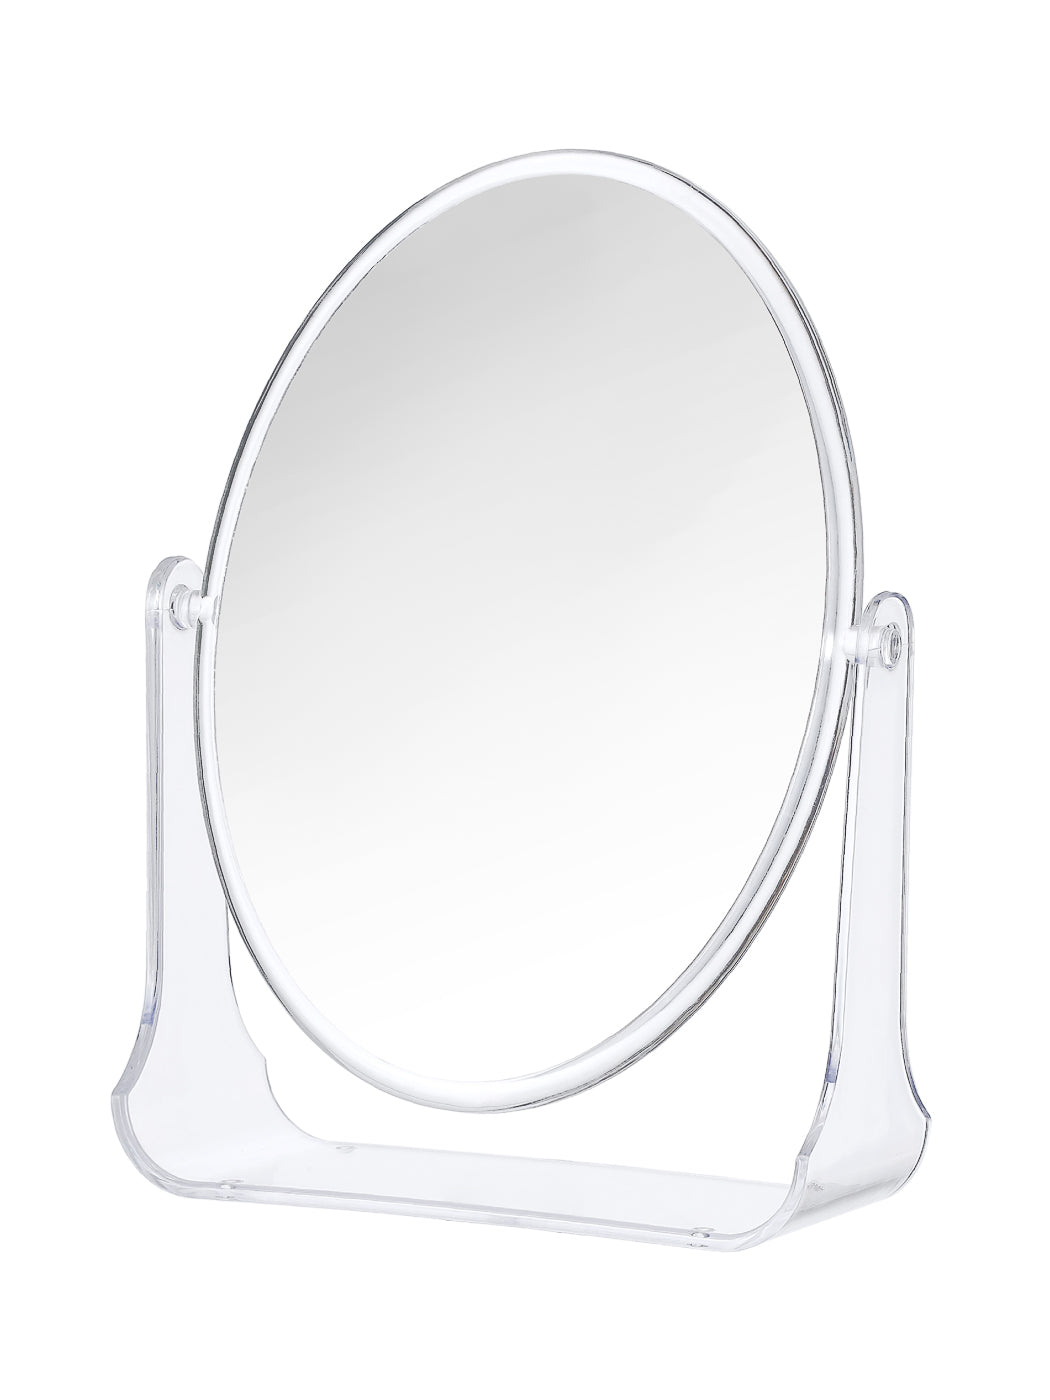 MINISO OVAL DOUBLE SIDED ROTATION VANITY MIRROR (2×MAGNIFICATION) 2010216810100 TABLE MIRROR-1